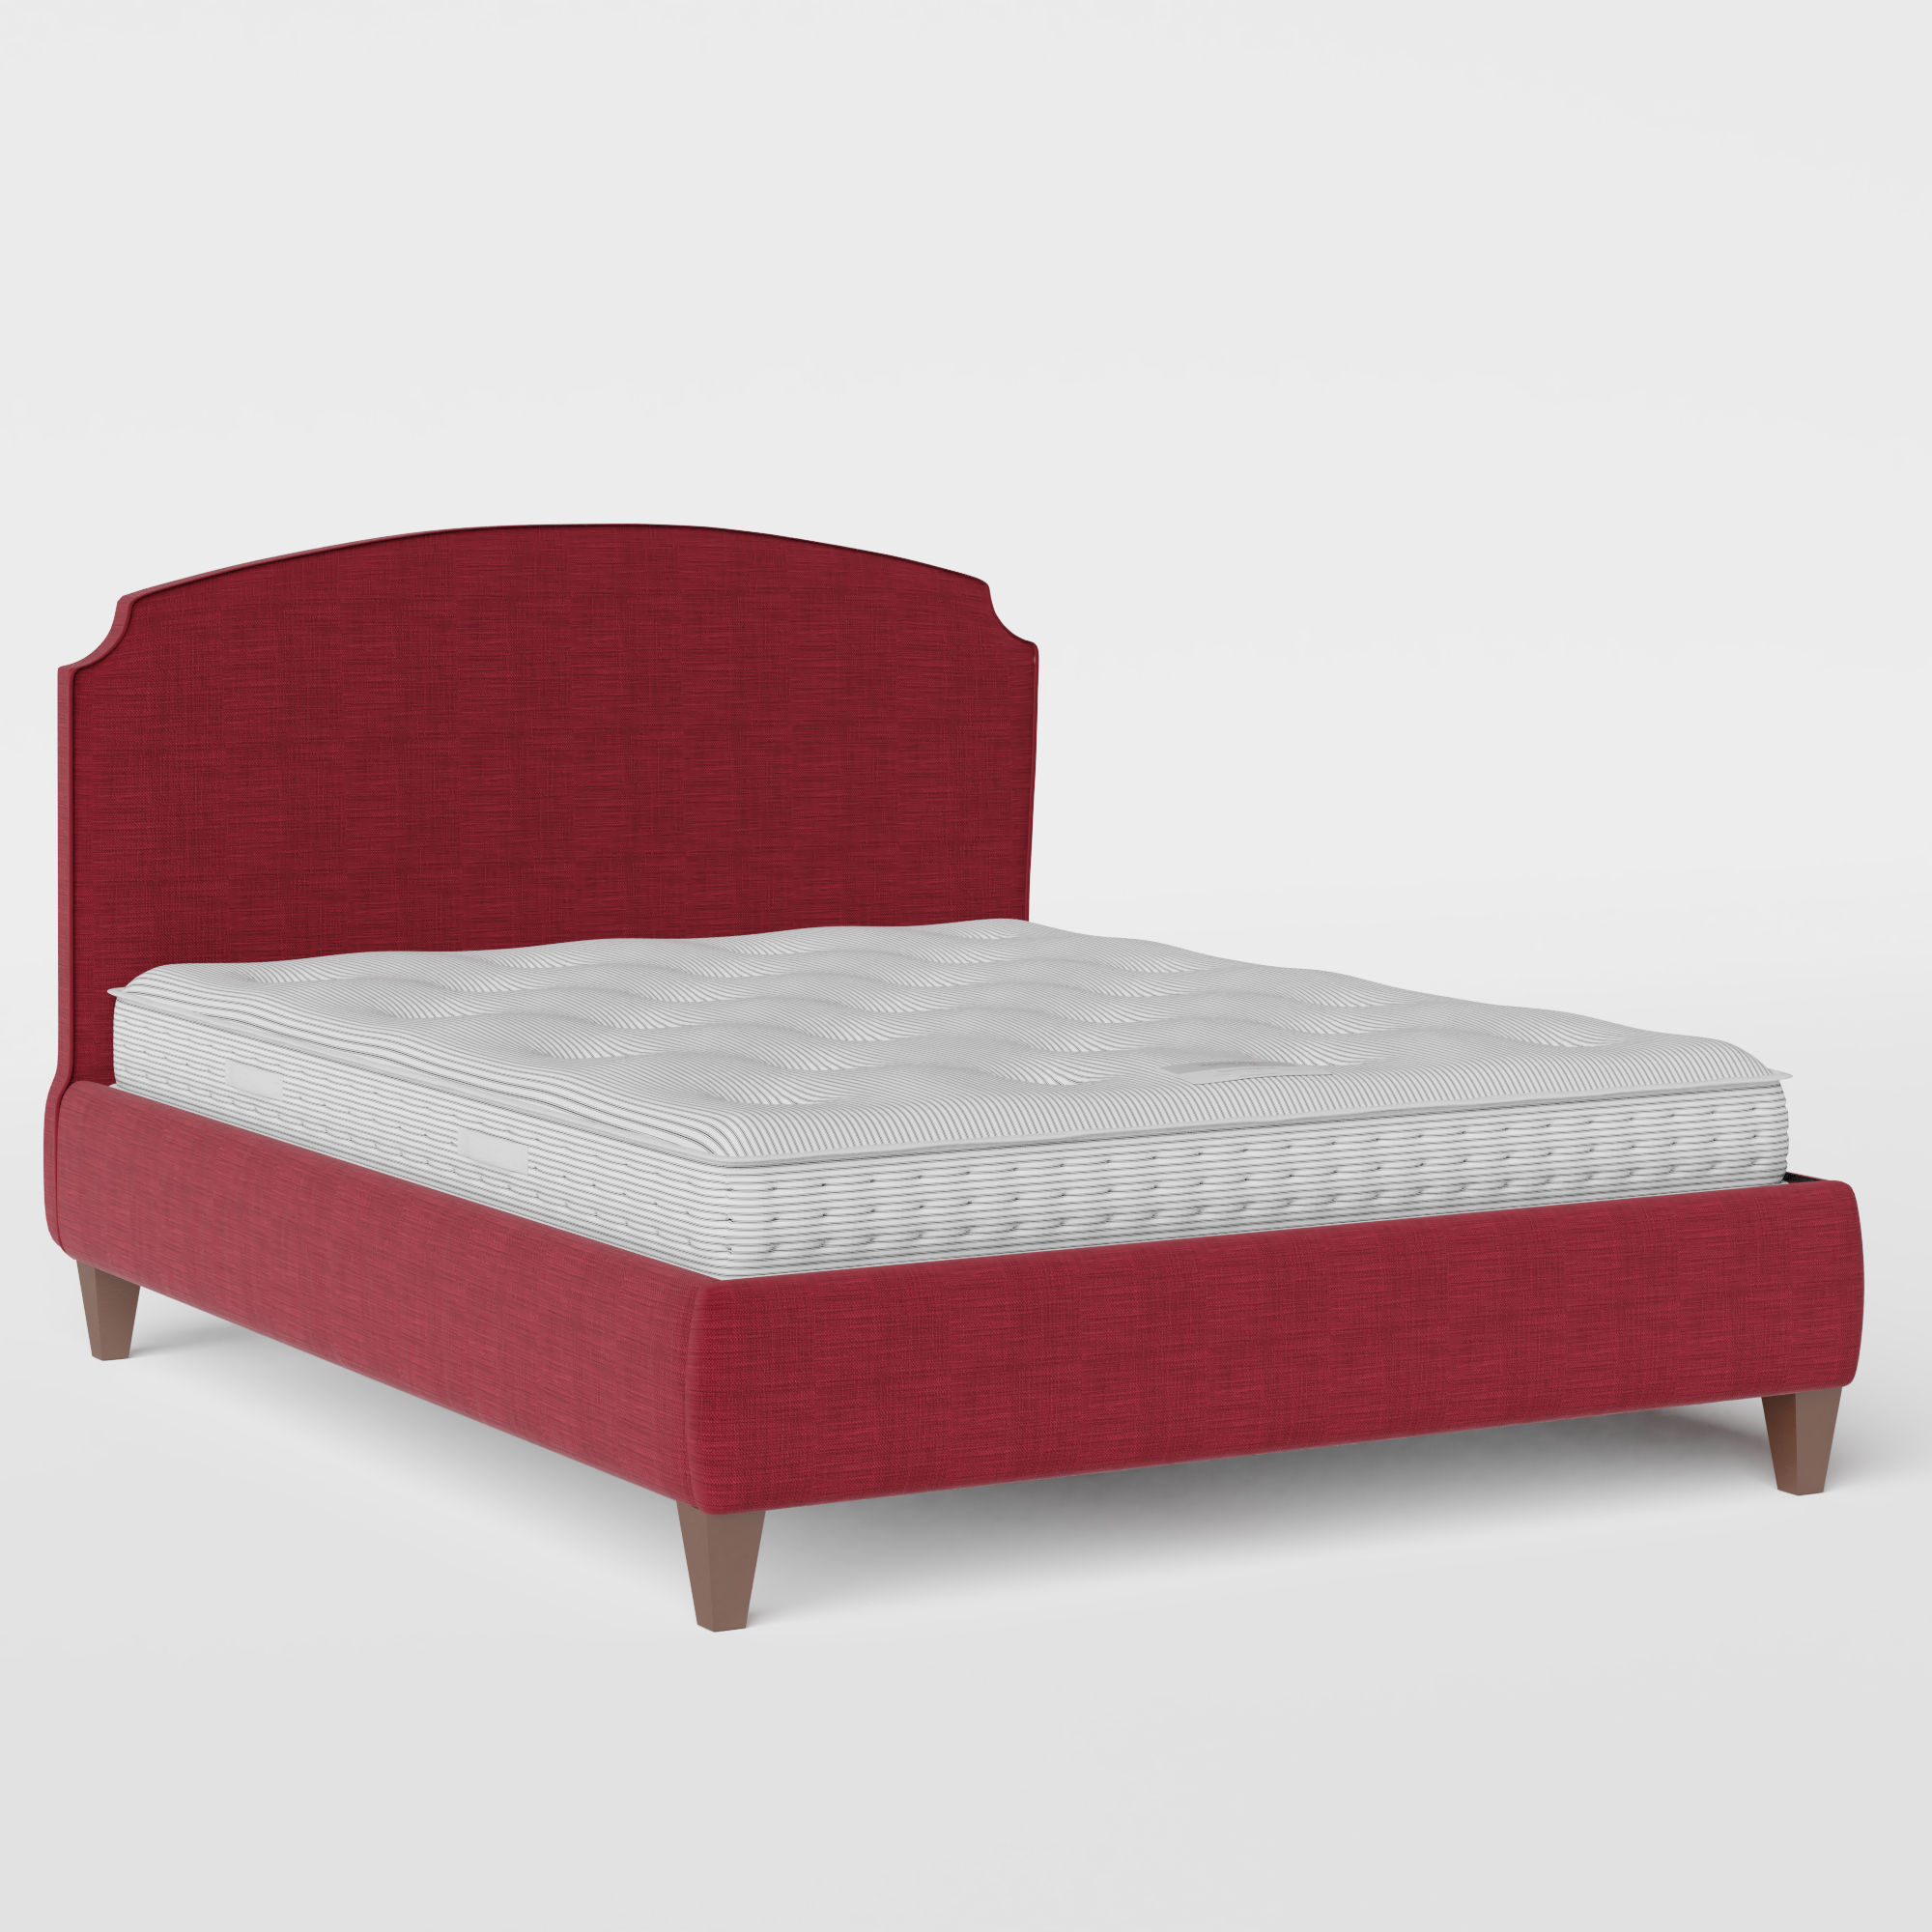 Lide with Piping upholstered bed in cherry fabric